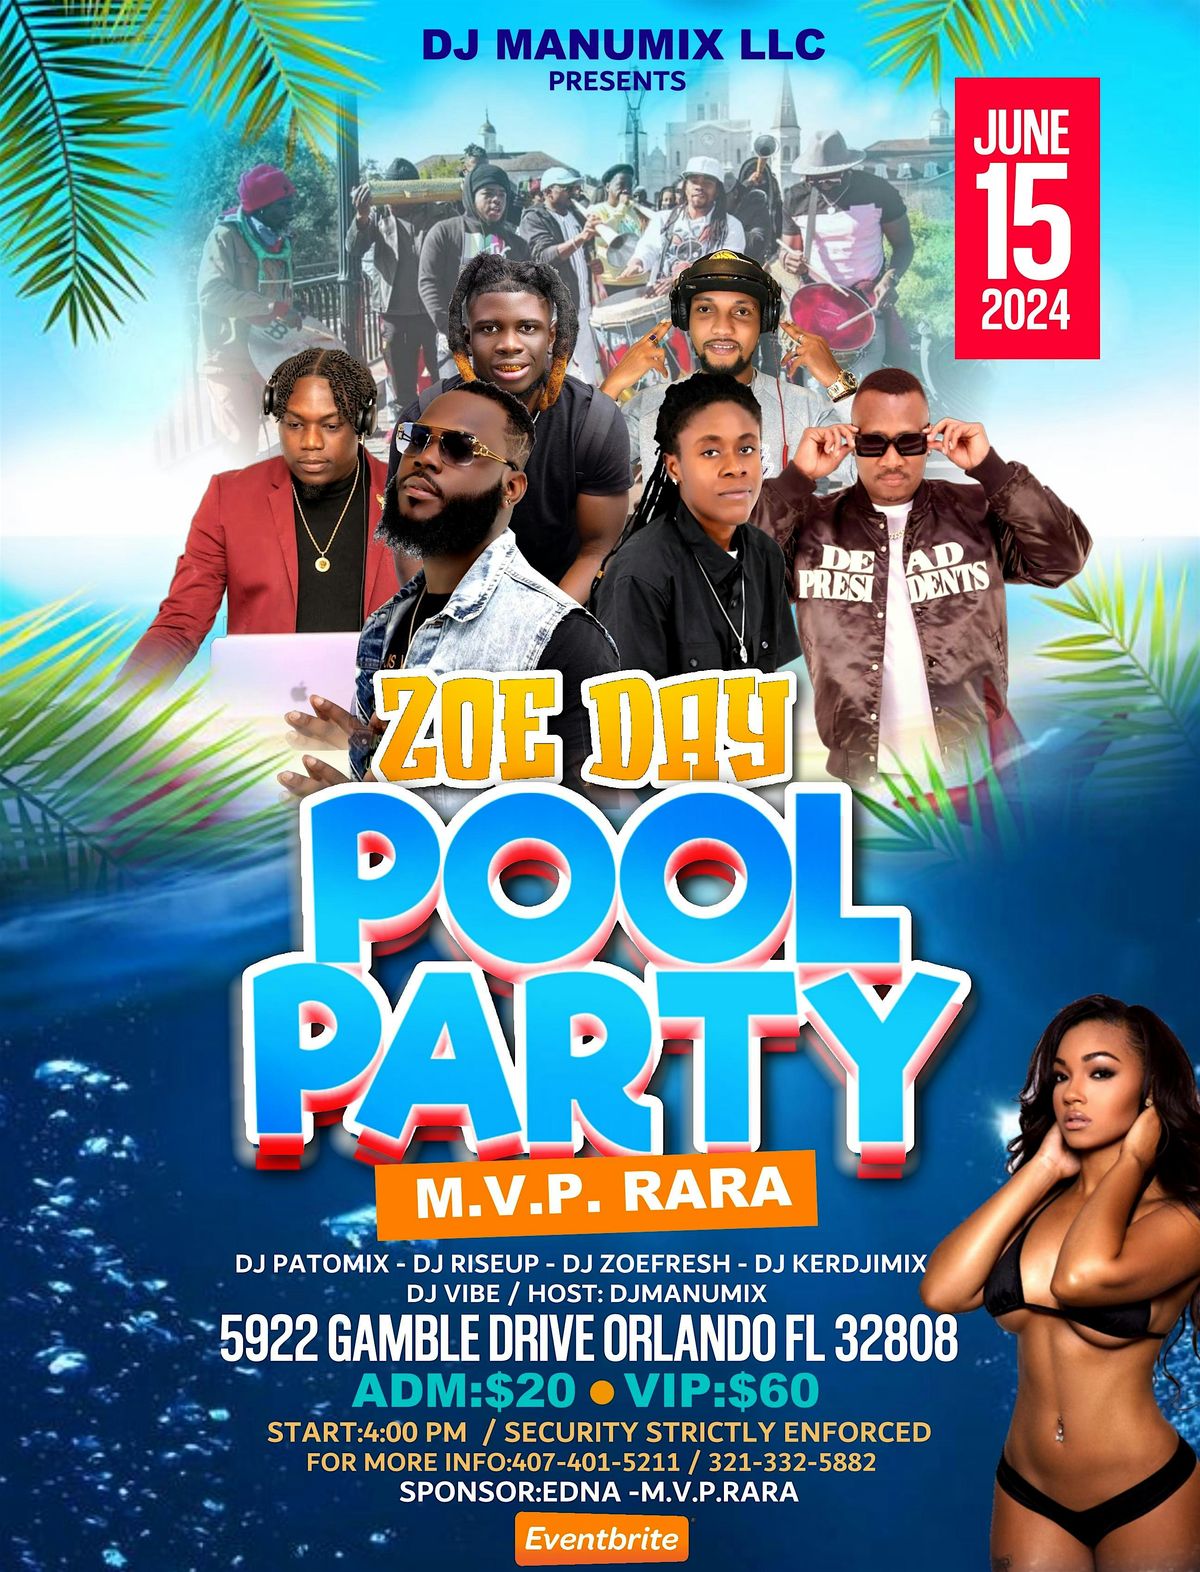 Get ready to splash and have fun at Zoe Day pool party.